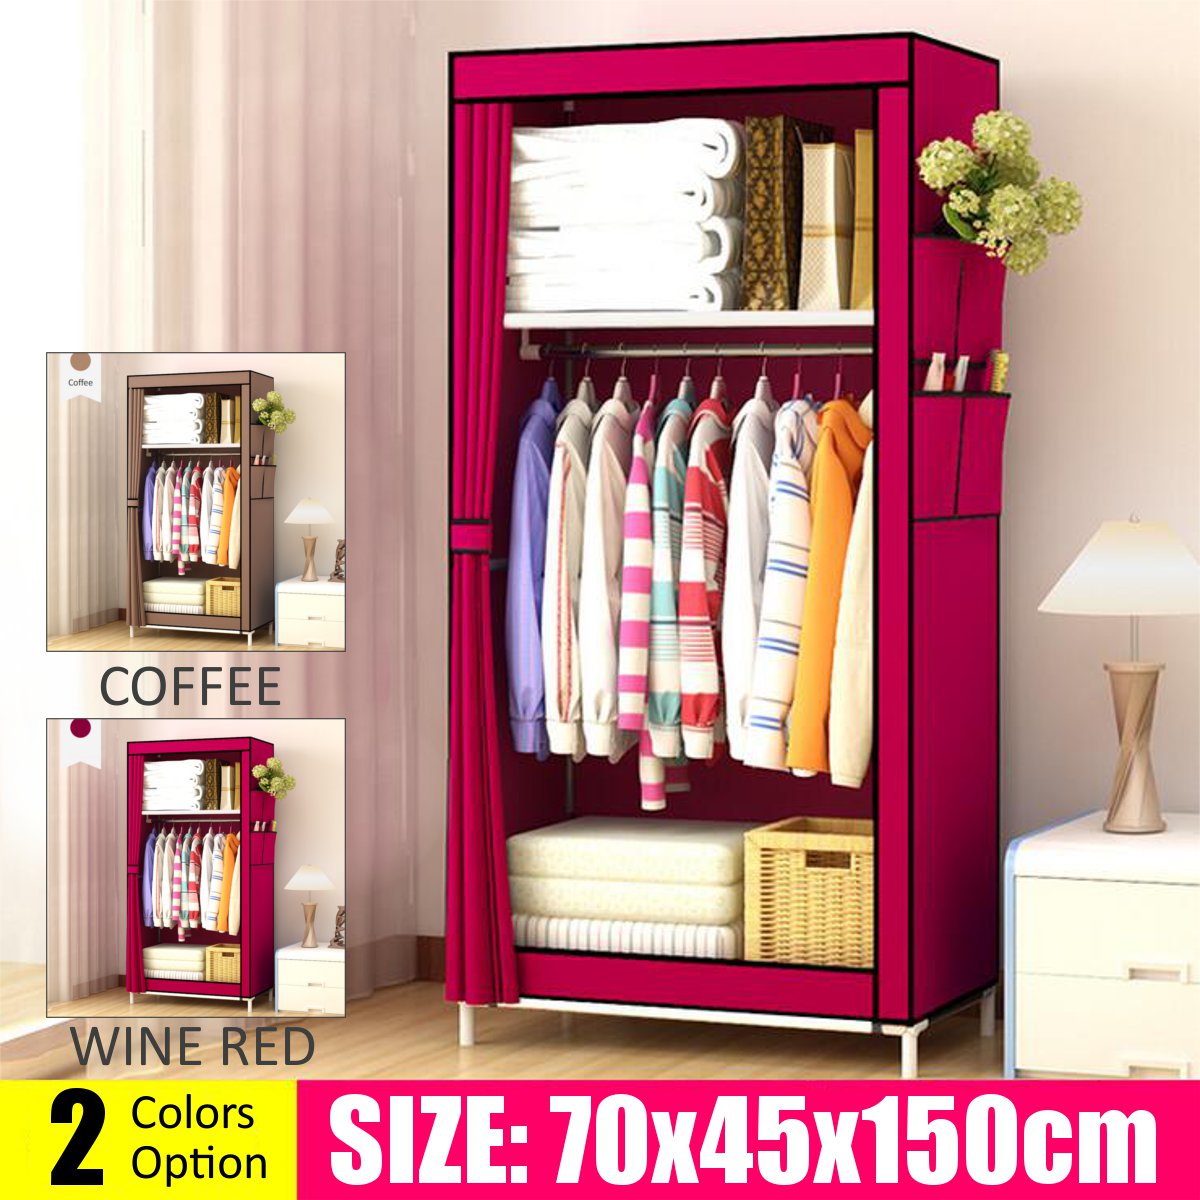 Portable Cloth Wardrobe Home Bedroom Clothes Storage Organizer Cabinet DIY Assembly Dampproof Fabric Wardrobe Closet Furniture